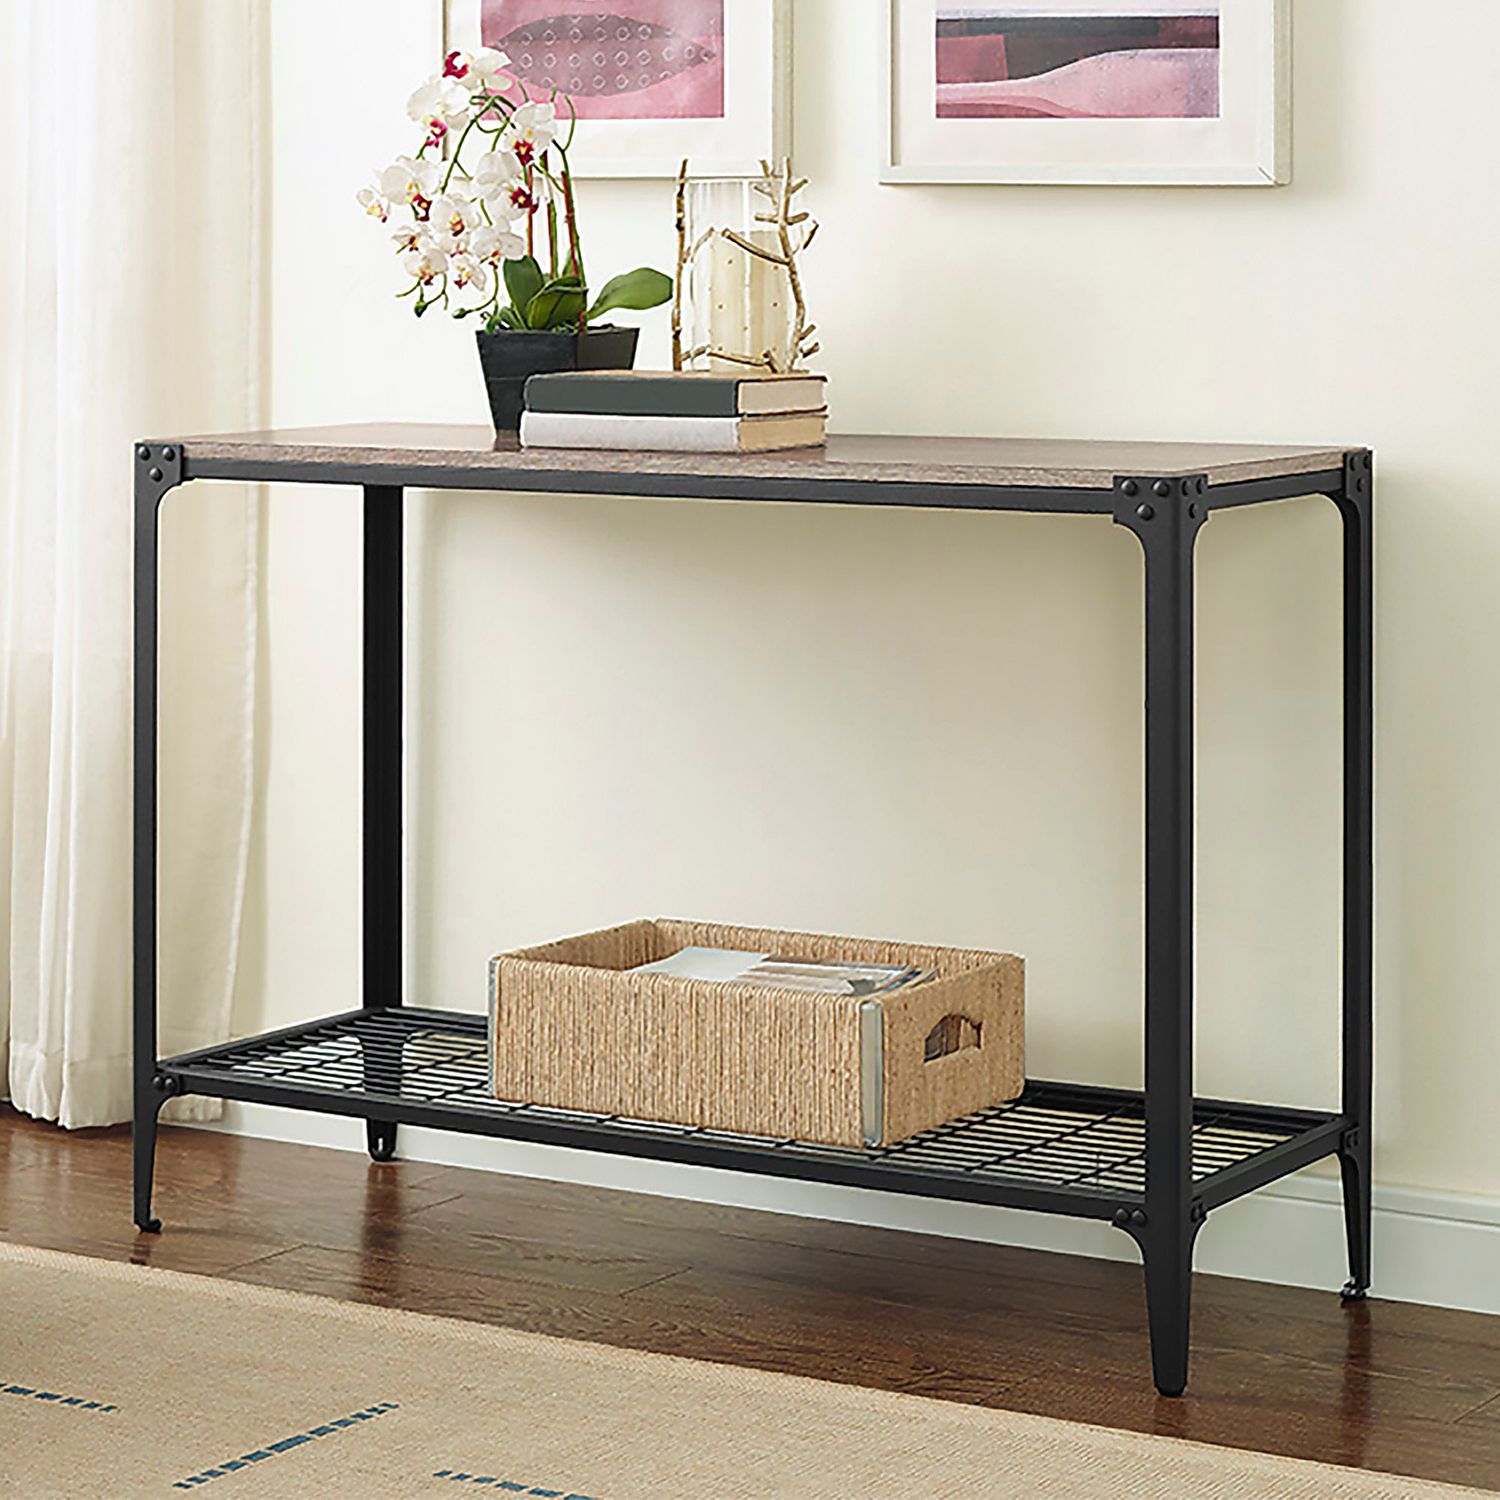 Popular Metal Console Tables Inside Angle Iron Rustic Console Table – Pier1 Imports (View 8 of 10)